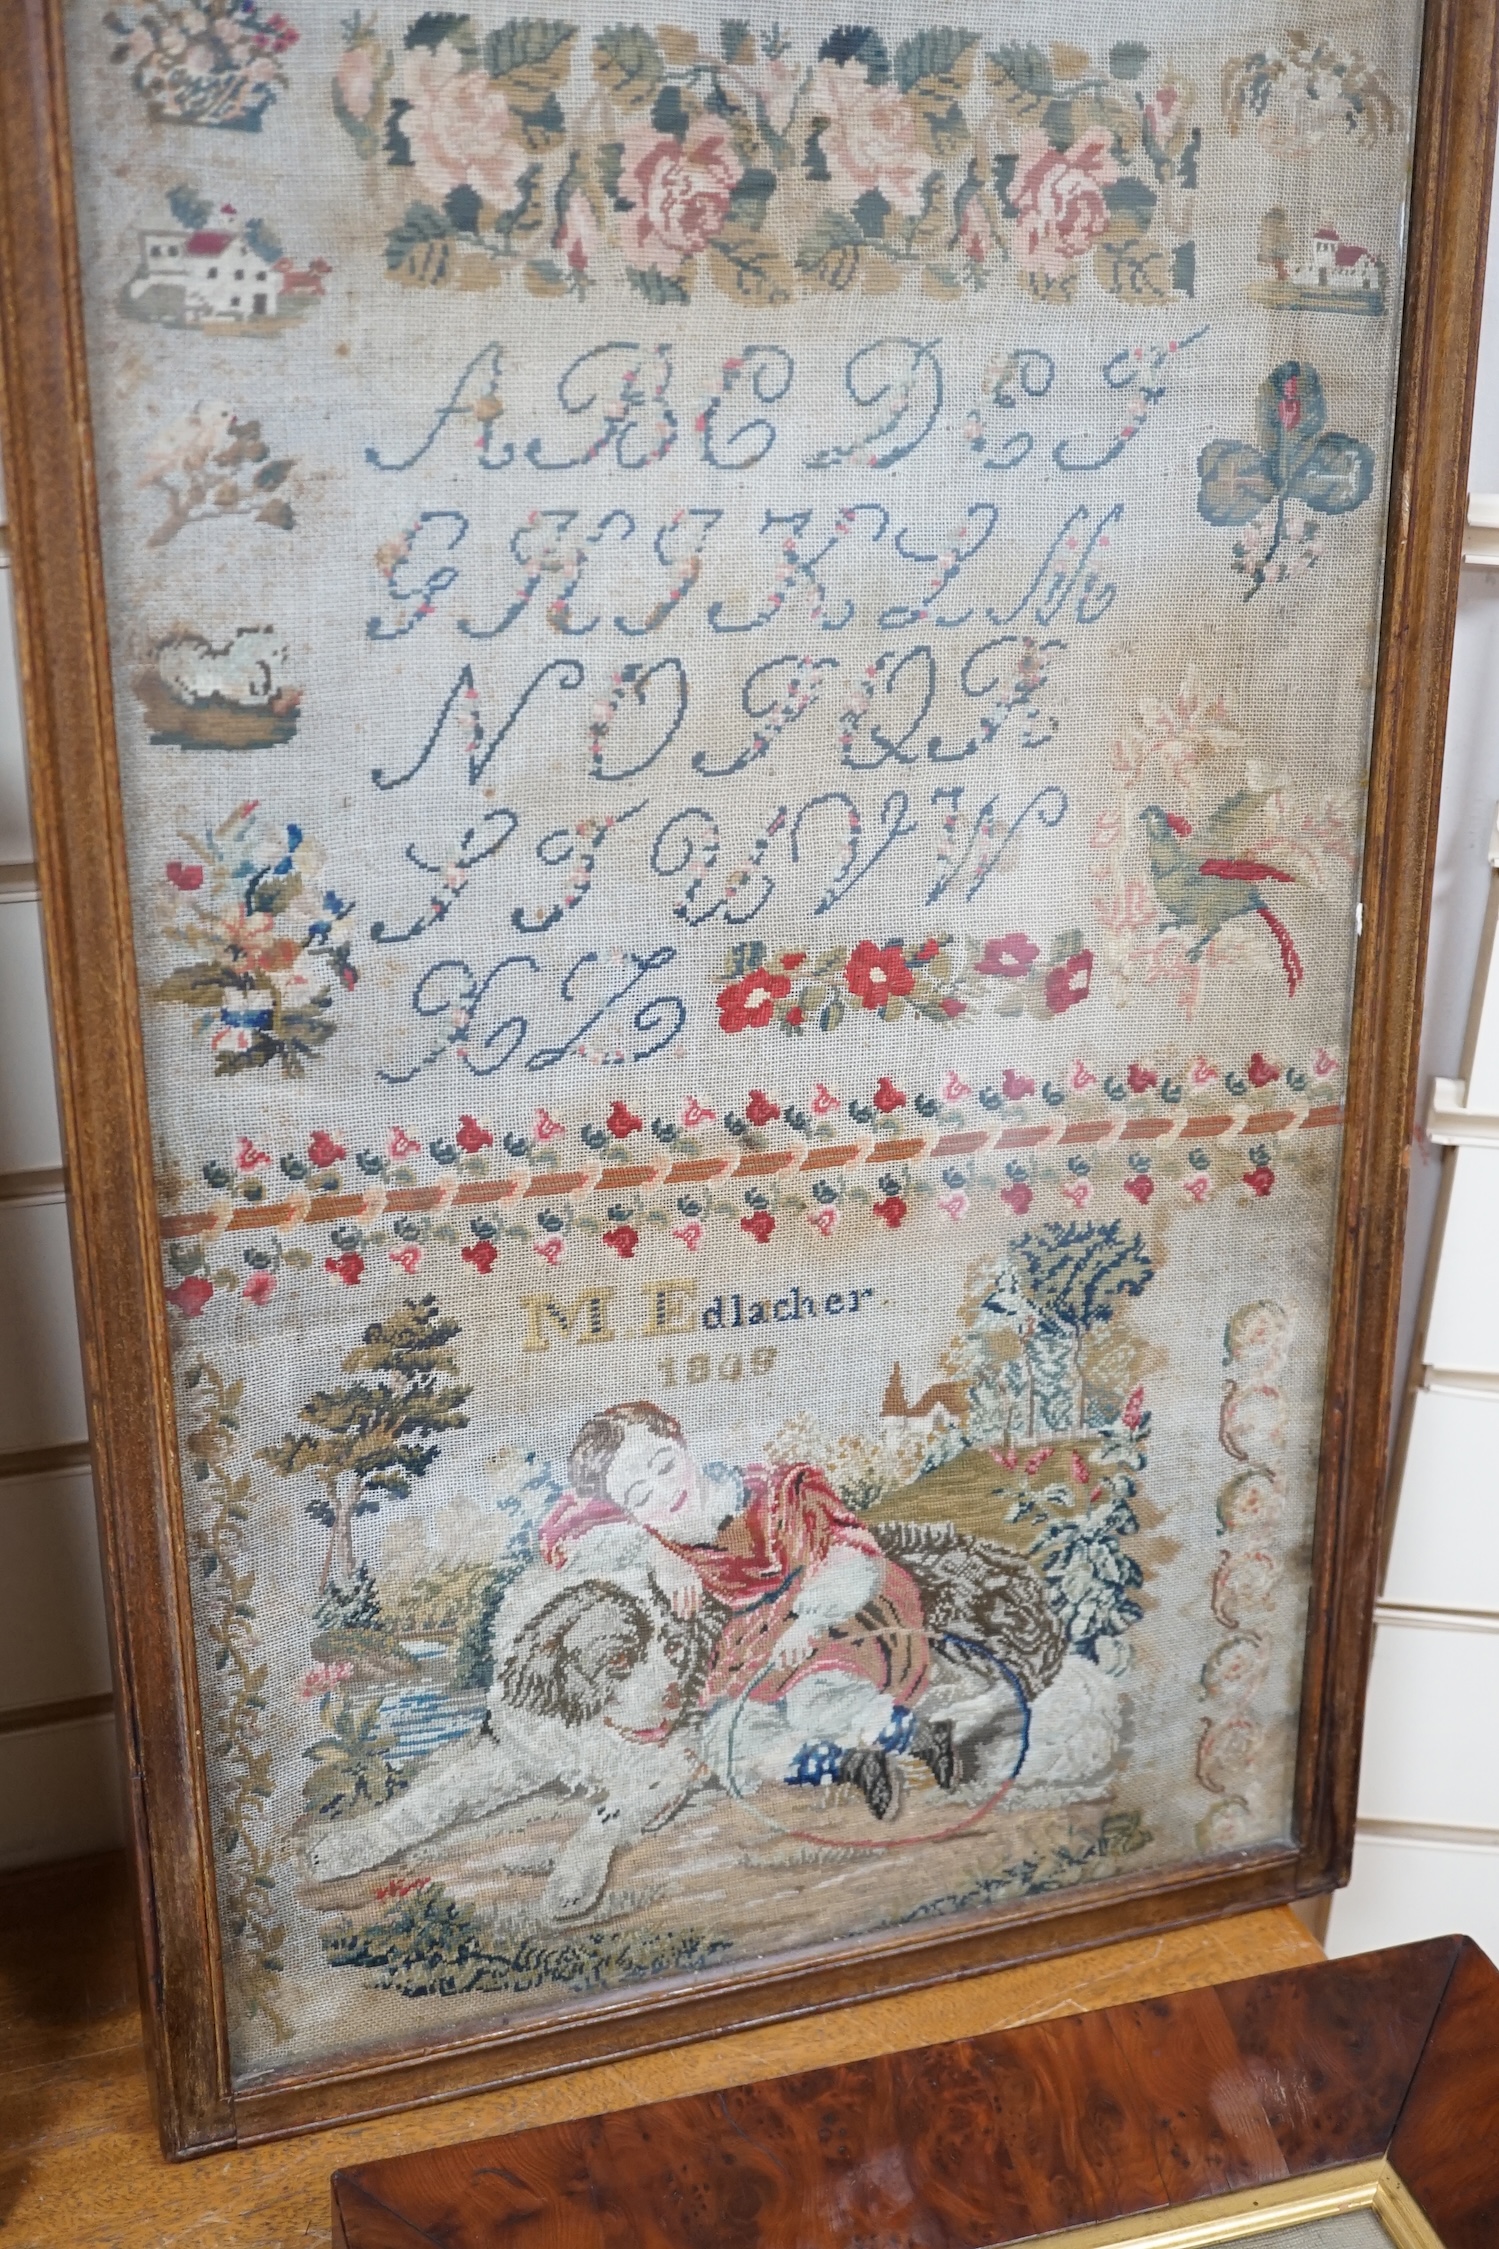 Two mid 19th century embroideries; a framed sampler dated 1809 and an embroidered figurative panel, largest 114 x 42cm. Condition - poor